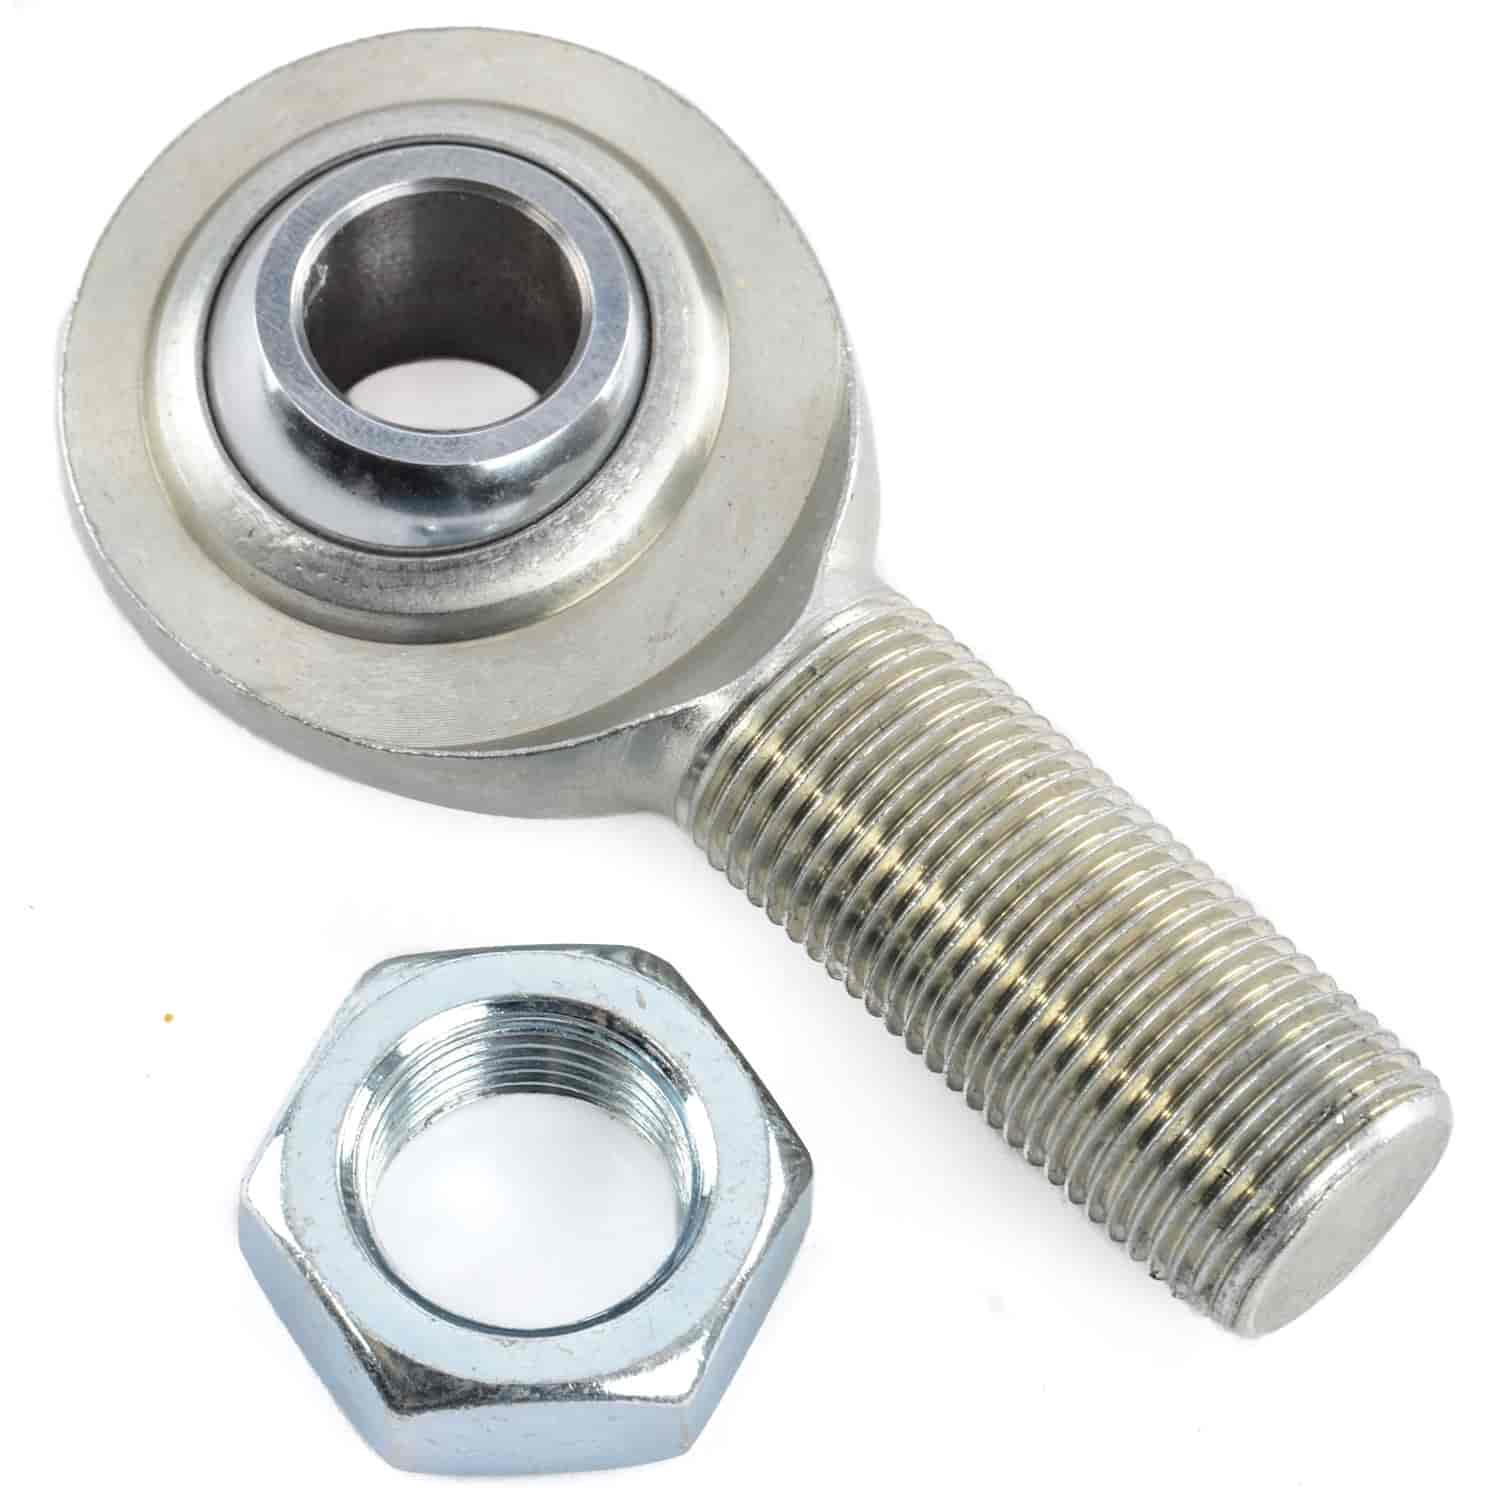 Two-Piece Rod End with Jam Nut 5/8